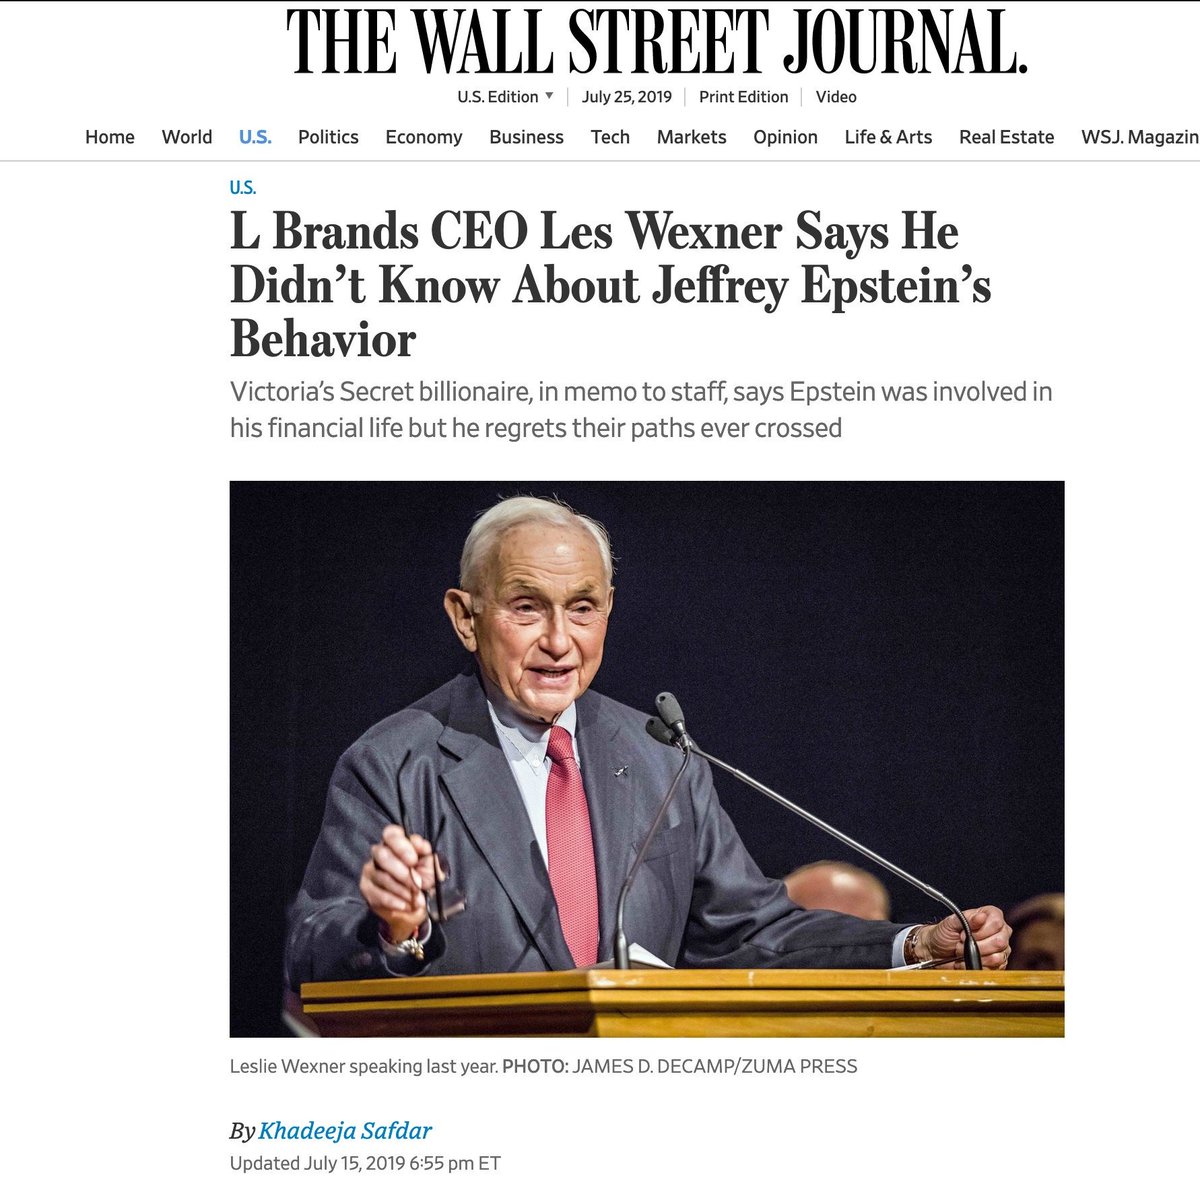 ExcusesWSJ7-15-19Leslie Wexnerwasn't aware ofmoney manager,Jeffrey Epstein's,criminal behavior."Would never have guesseda person I employedmore than a decade agoTry 80s Les. Not a decade.Y can't WSJ remember their own reporting.They met in the 80s per WSJ!